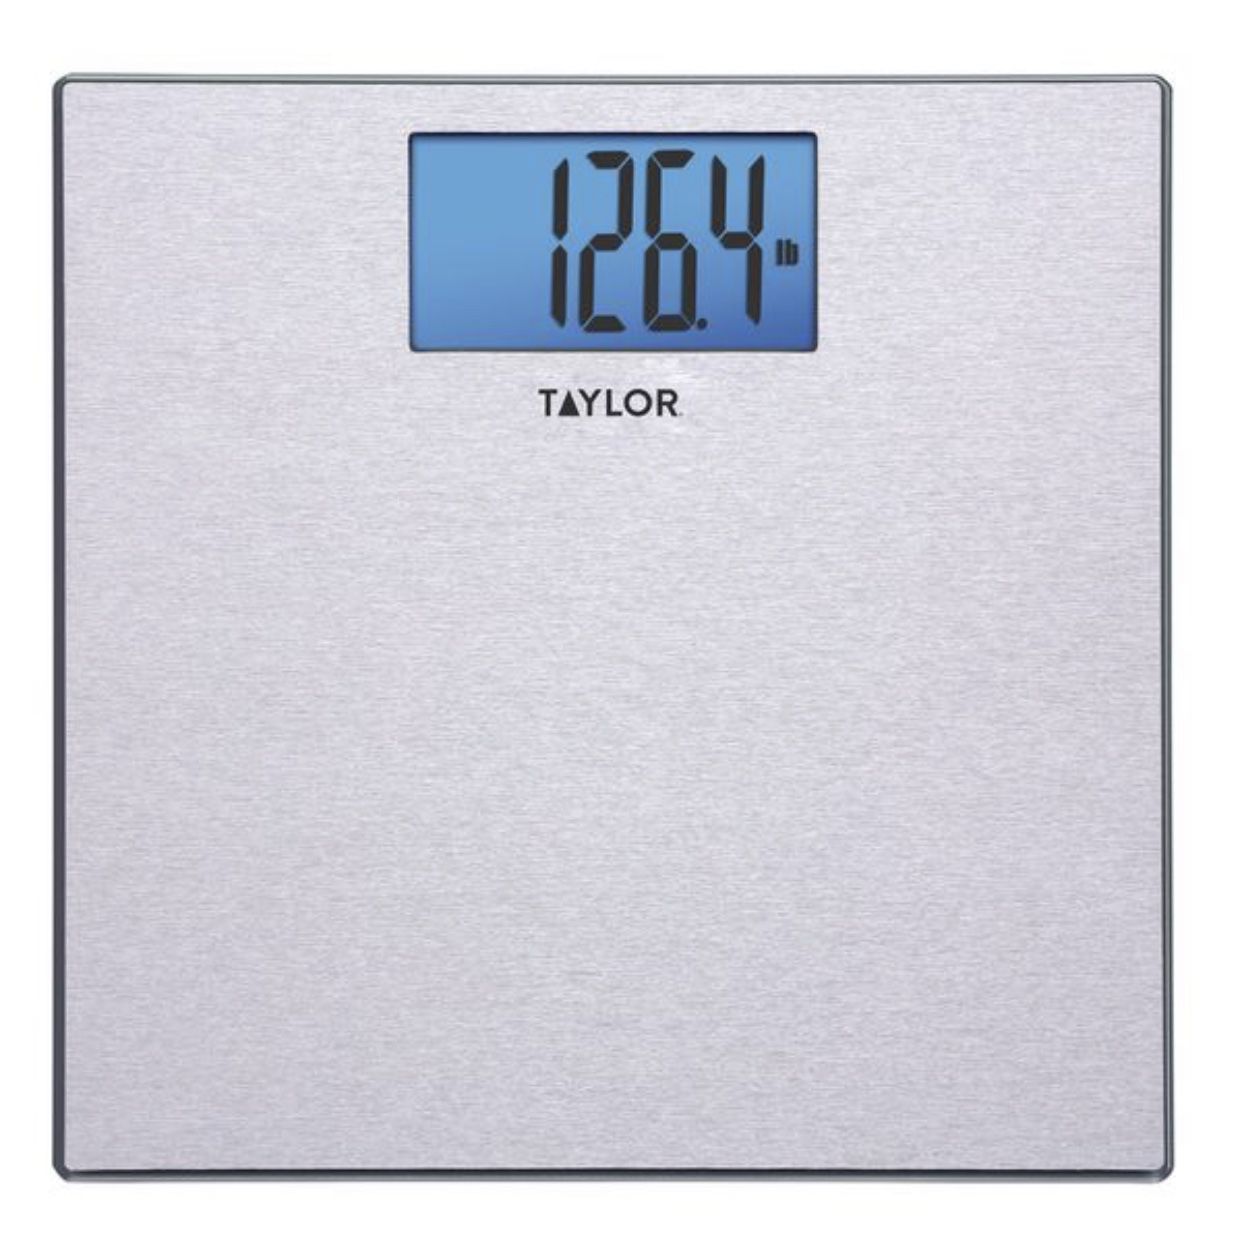 Taylor brushed metal scale